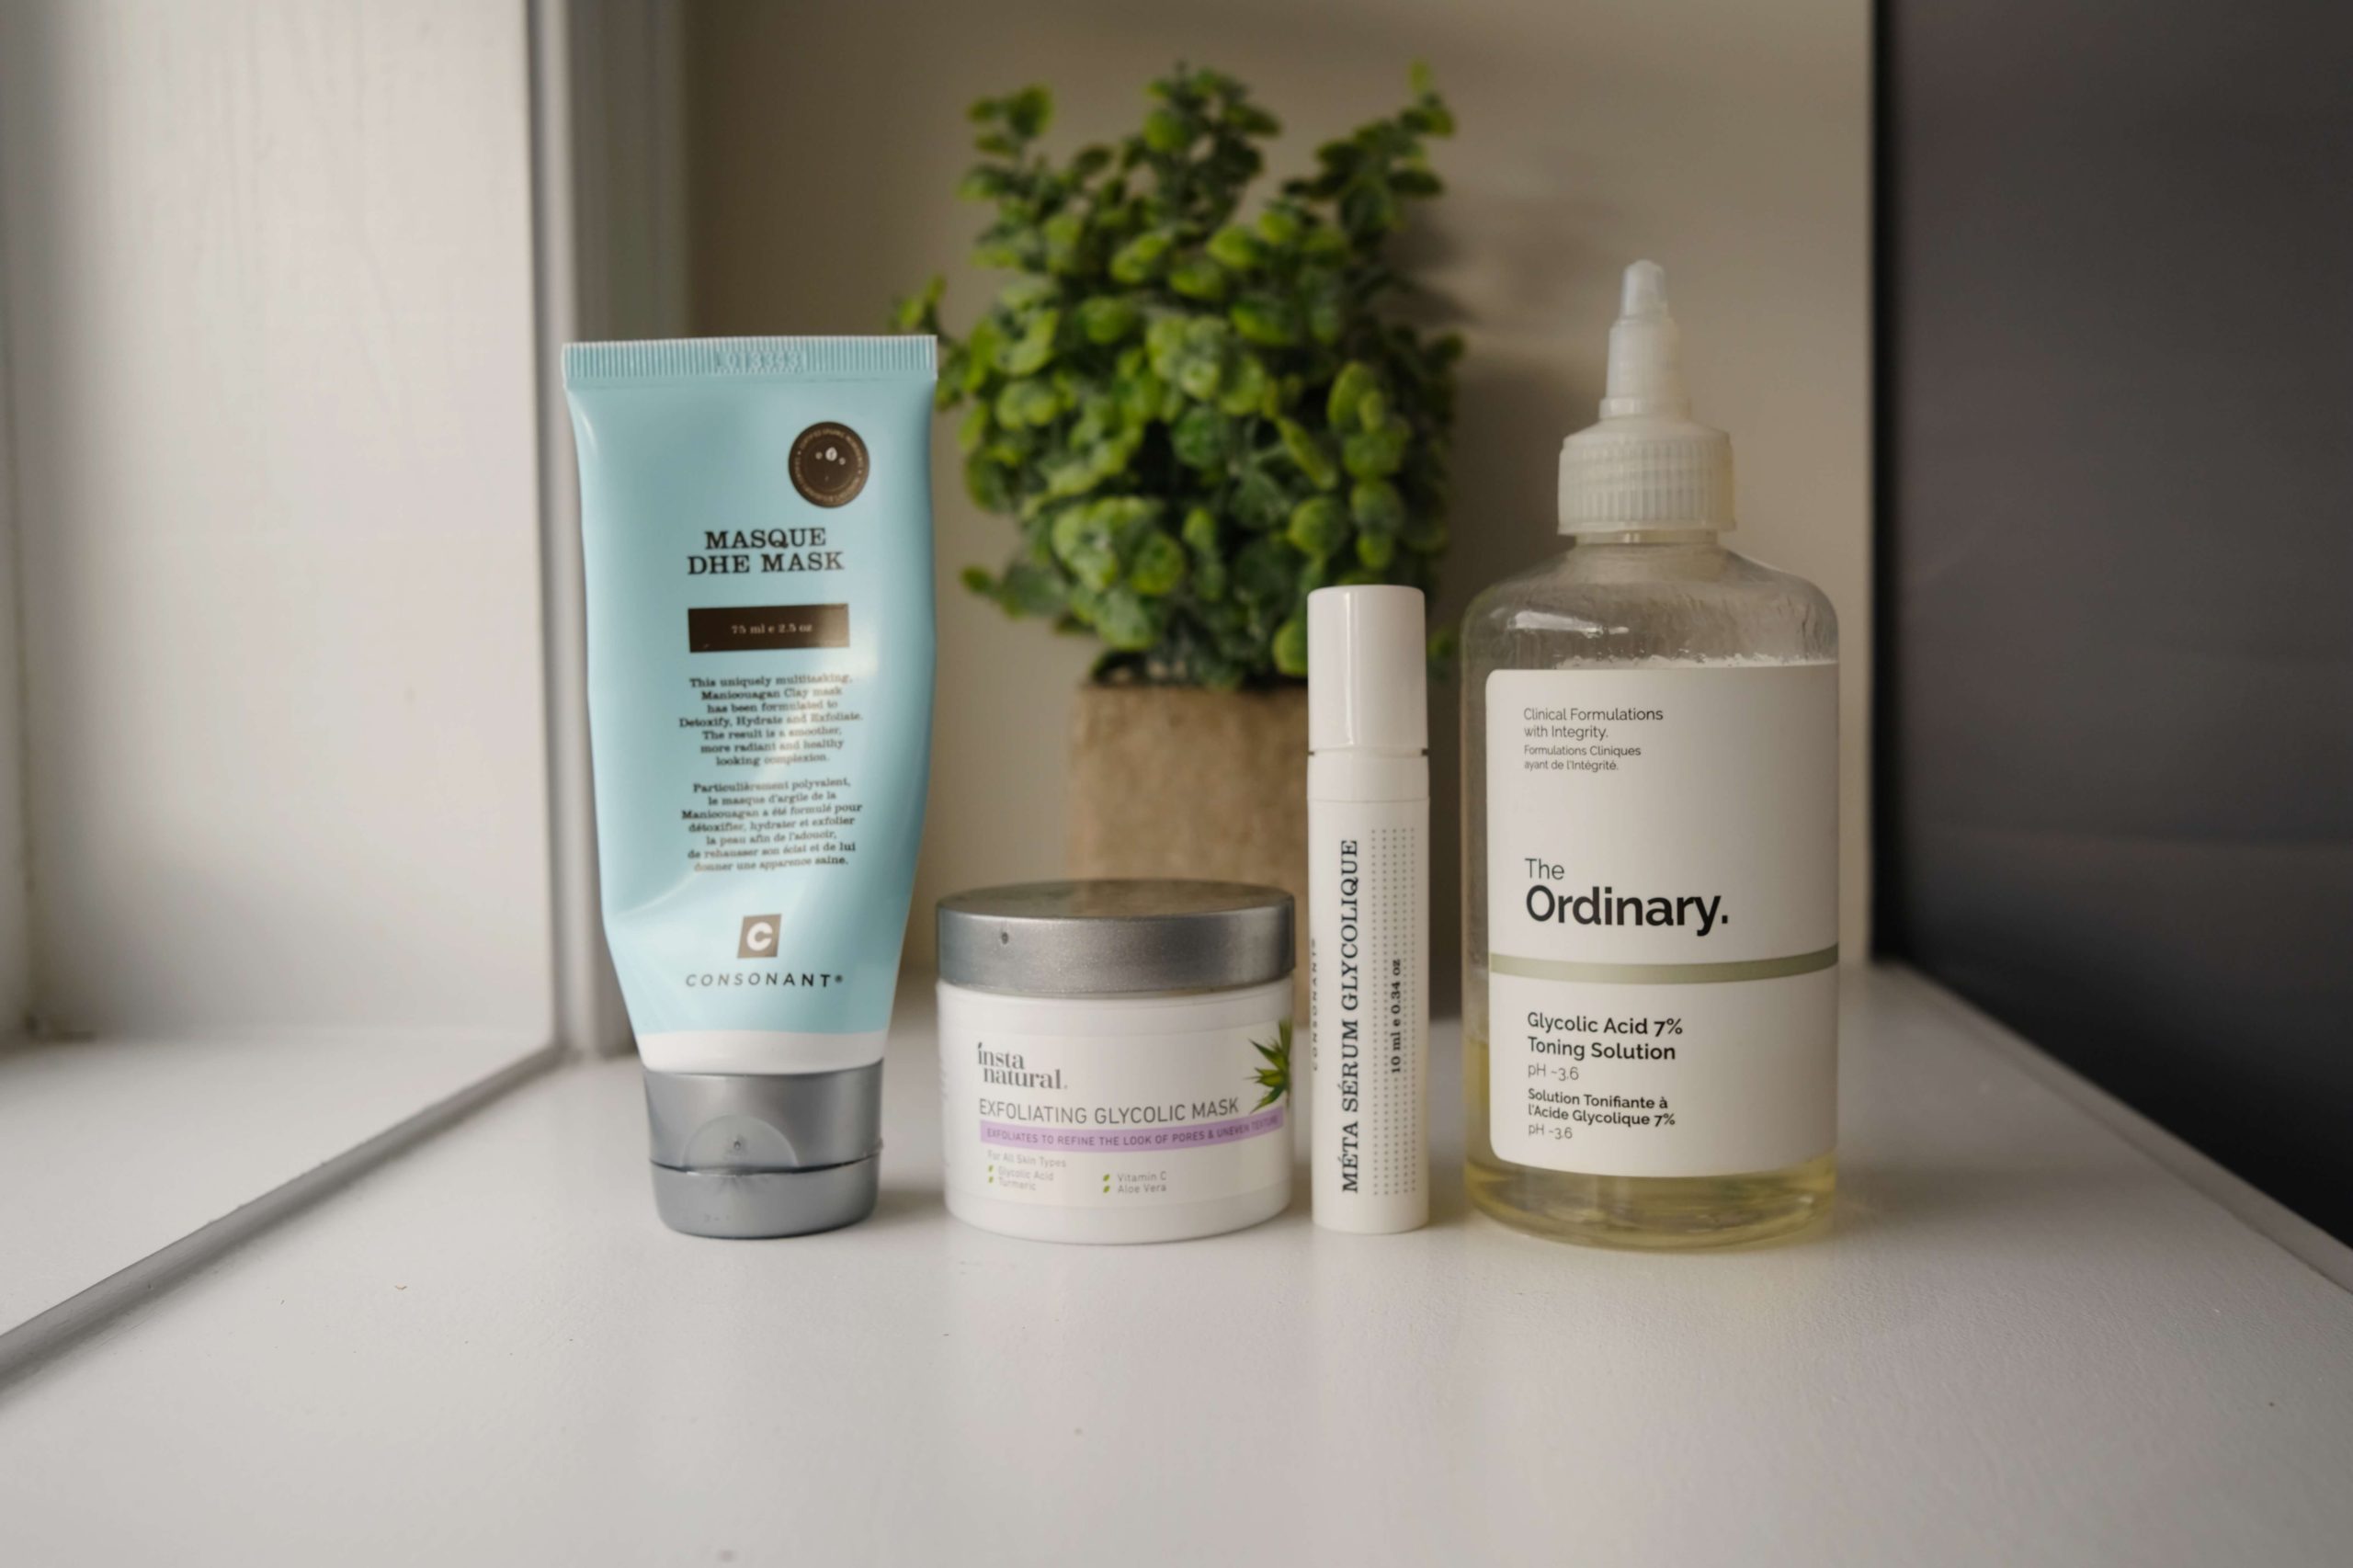 Chemical exfoliants for acne scars: Consonant Skincare DHE Mask, Instanatural Exfoliating Glycolic Mask, Consonant Skincare Maximum Glycolic Meta Serum, The Ordinary Glycolic Acid 7% Toning Solution.